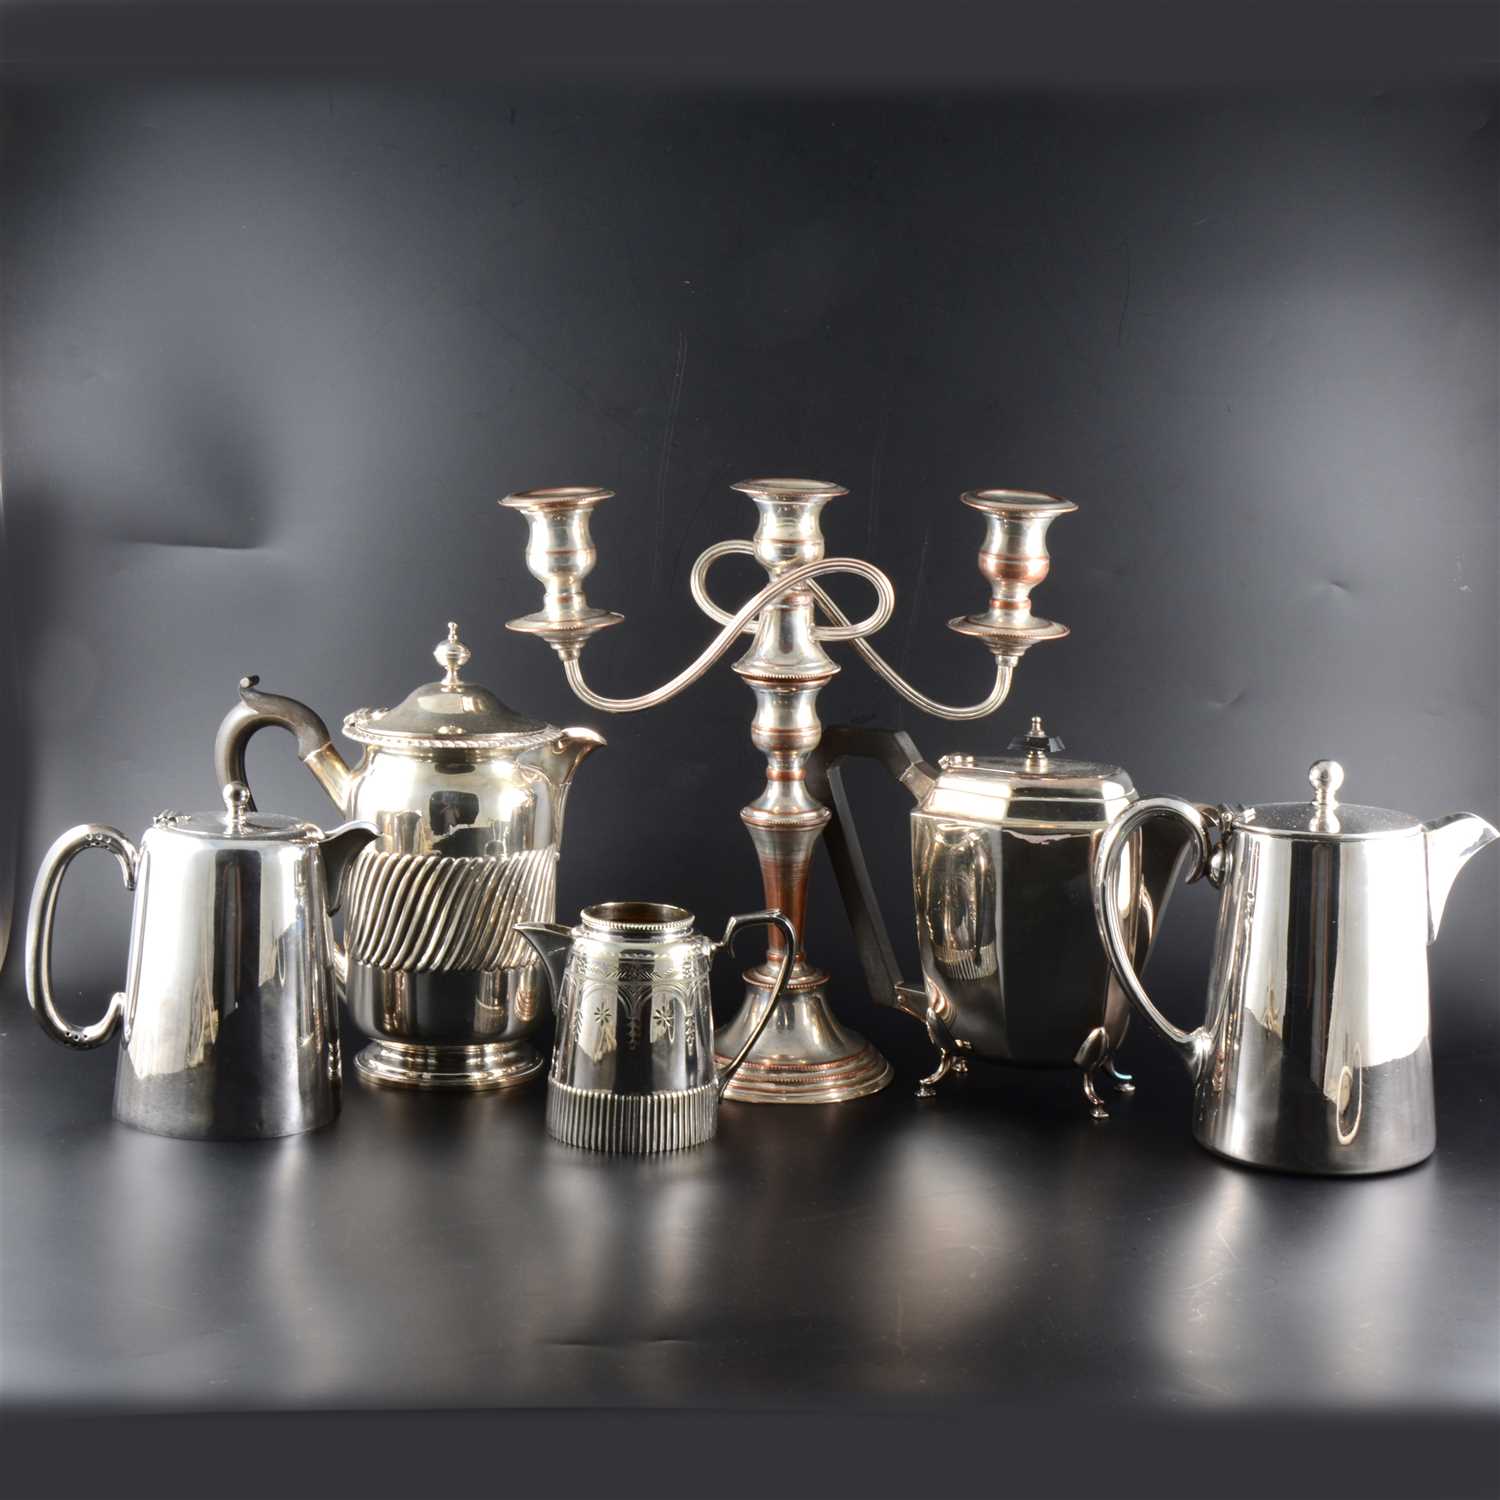 Lot 51 - A quantity of silver-plated, pewter and brass items, including three tankards engraved "Angel Hotel Kettering"